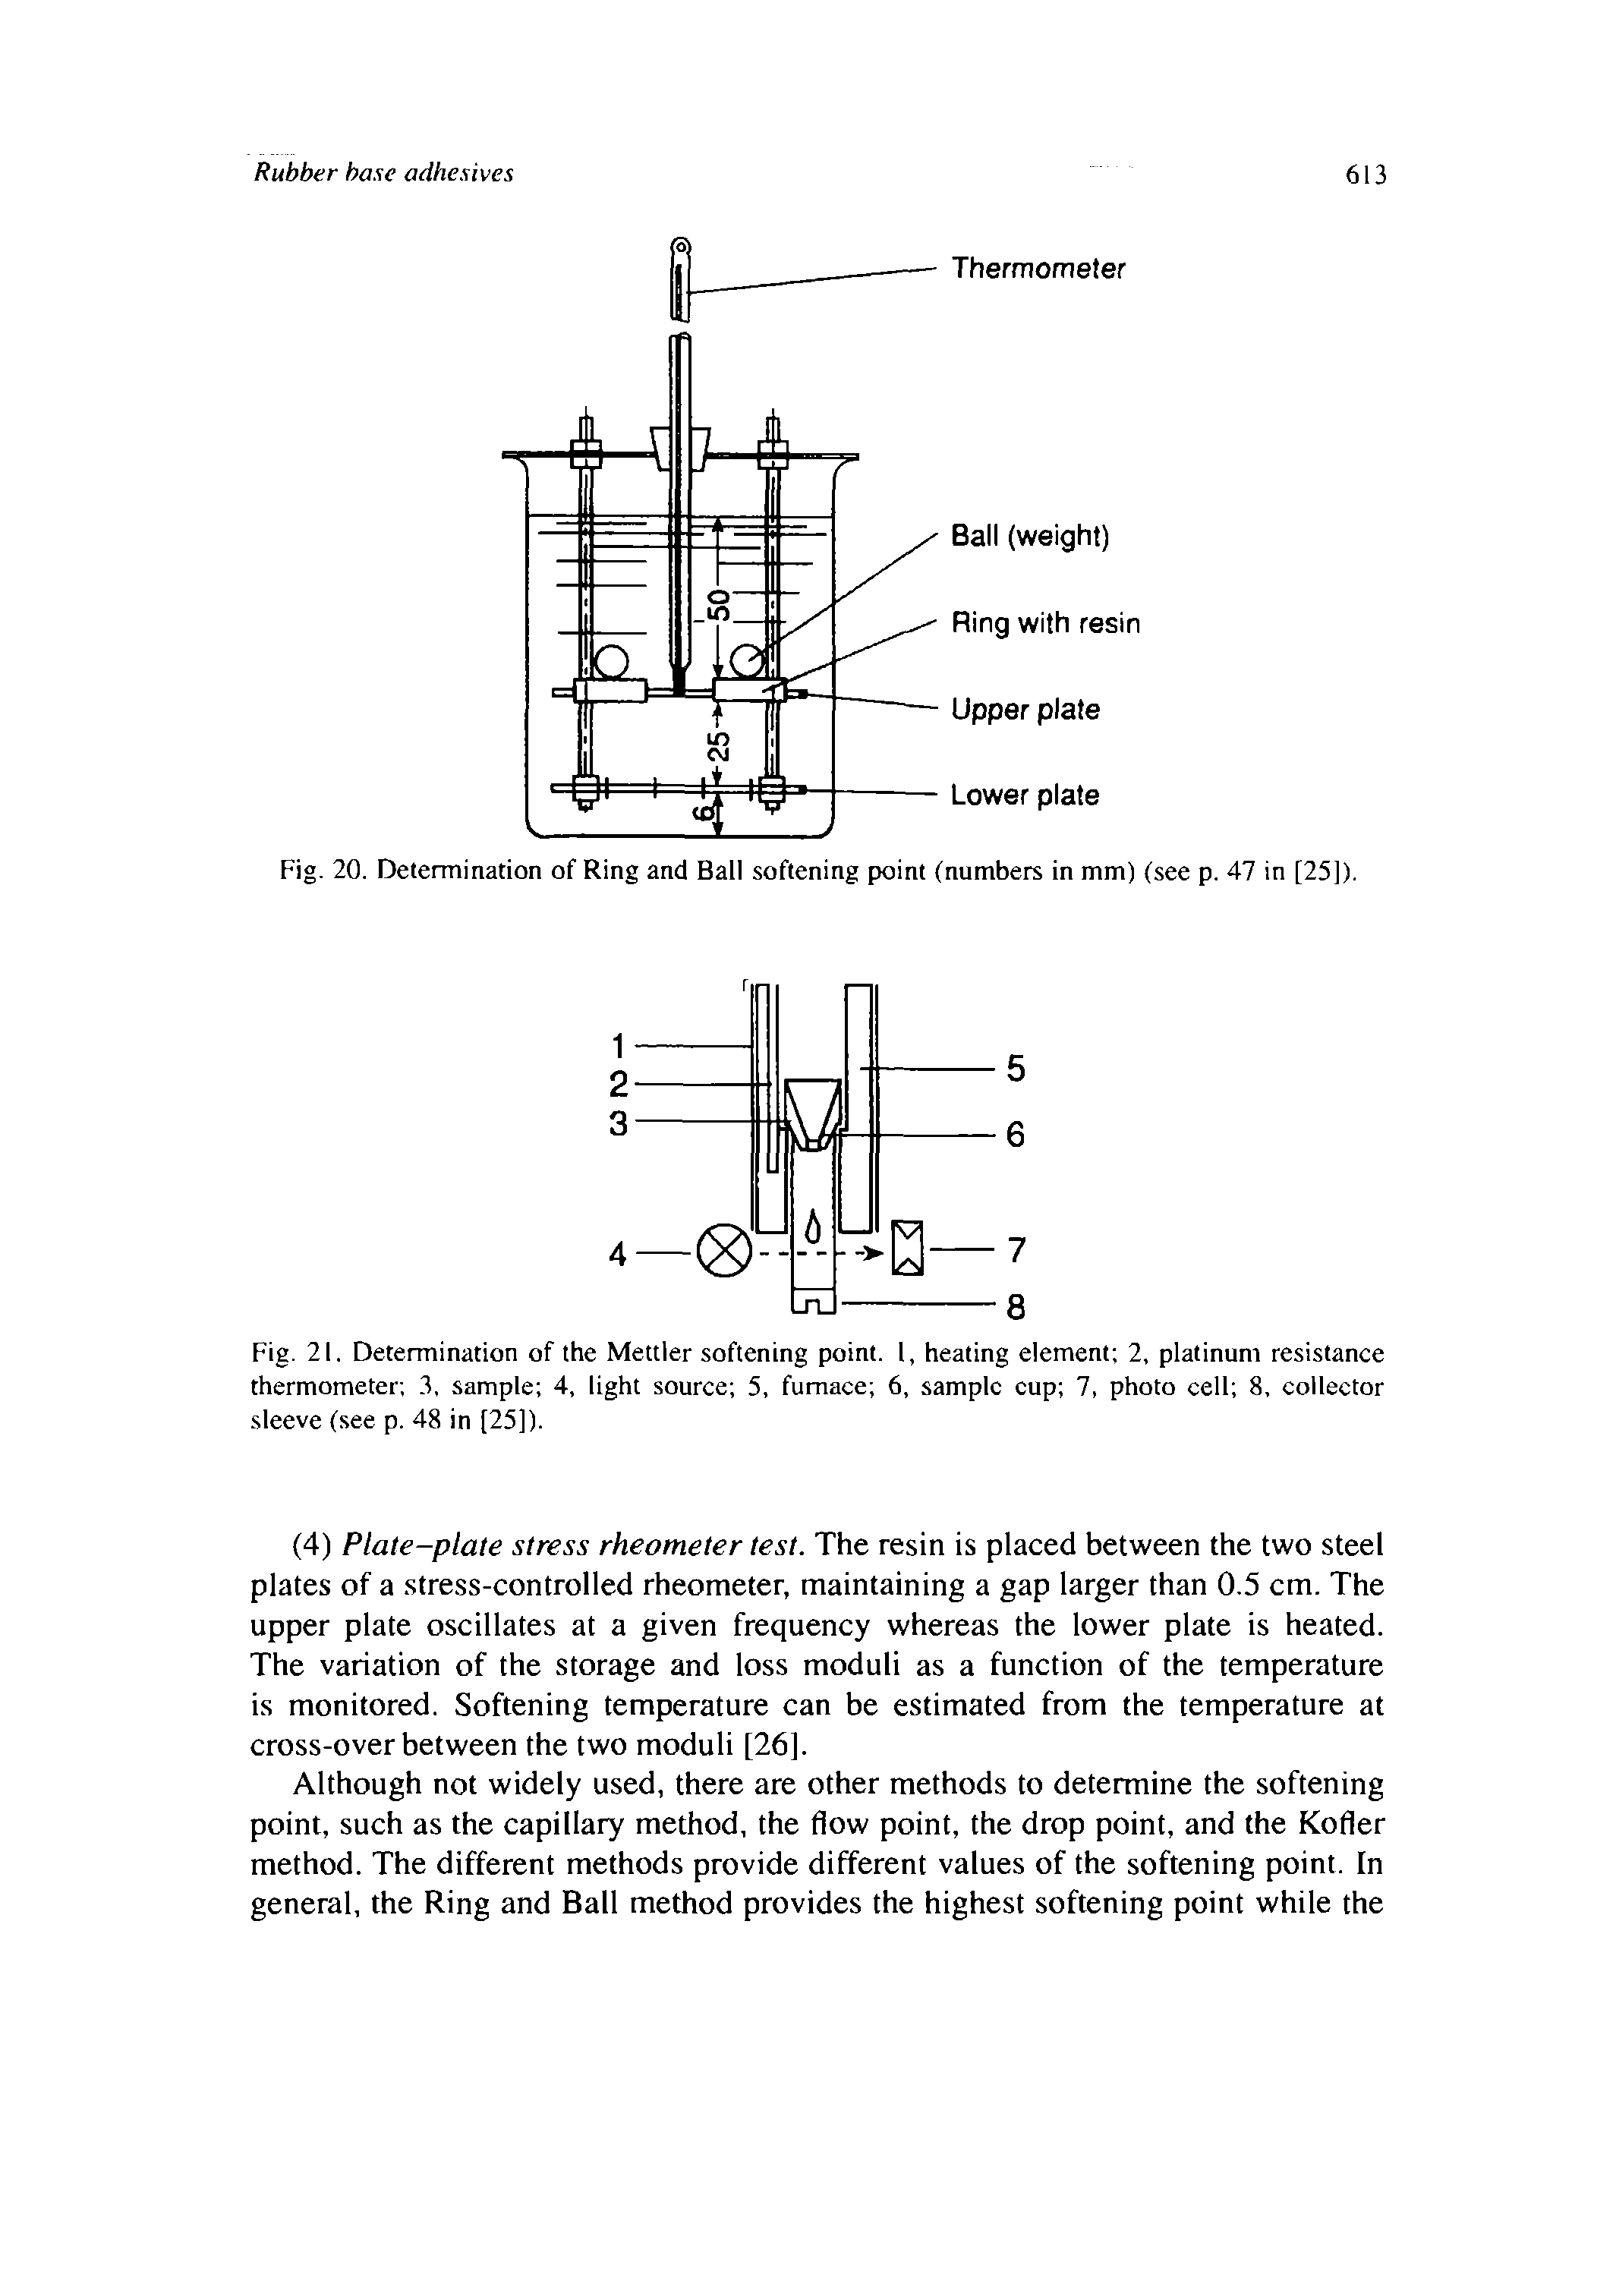 Fig. 21. Determination of the Mettler softening point. 1, heating element 2, platinum resistance thermometer 3, sample 4, light source 5, furnace 6, sample cup 7, photo cell 8, collector sleeve (see p. 48 in [25]).